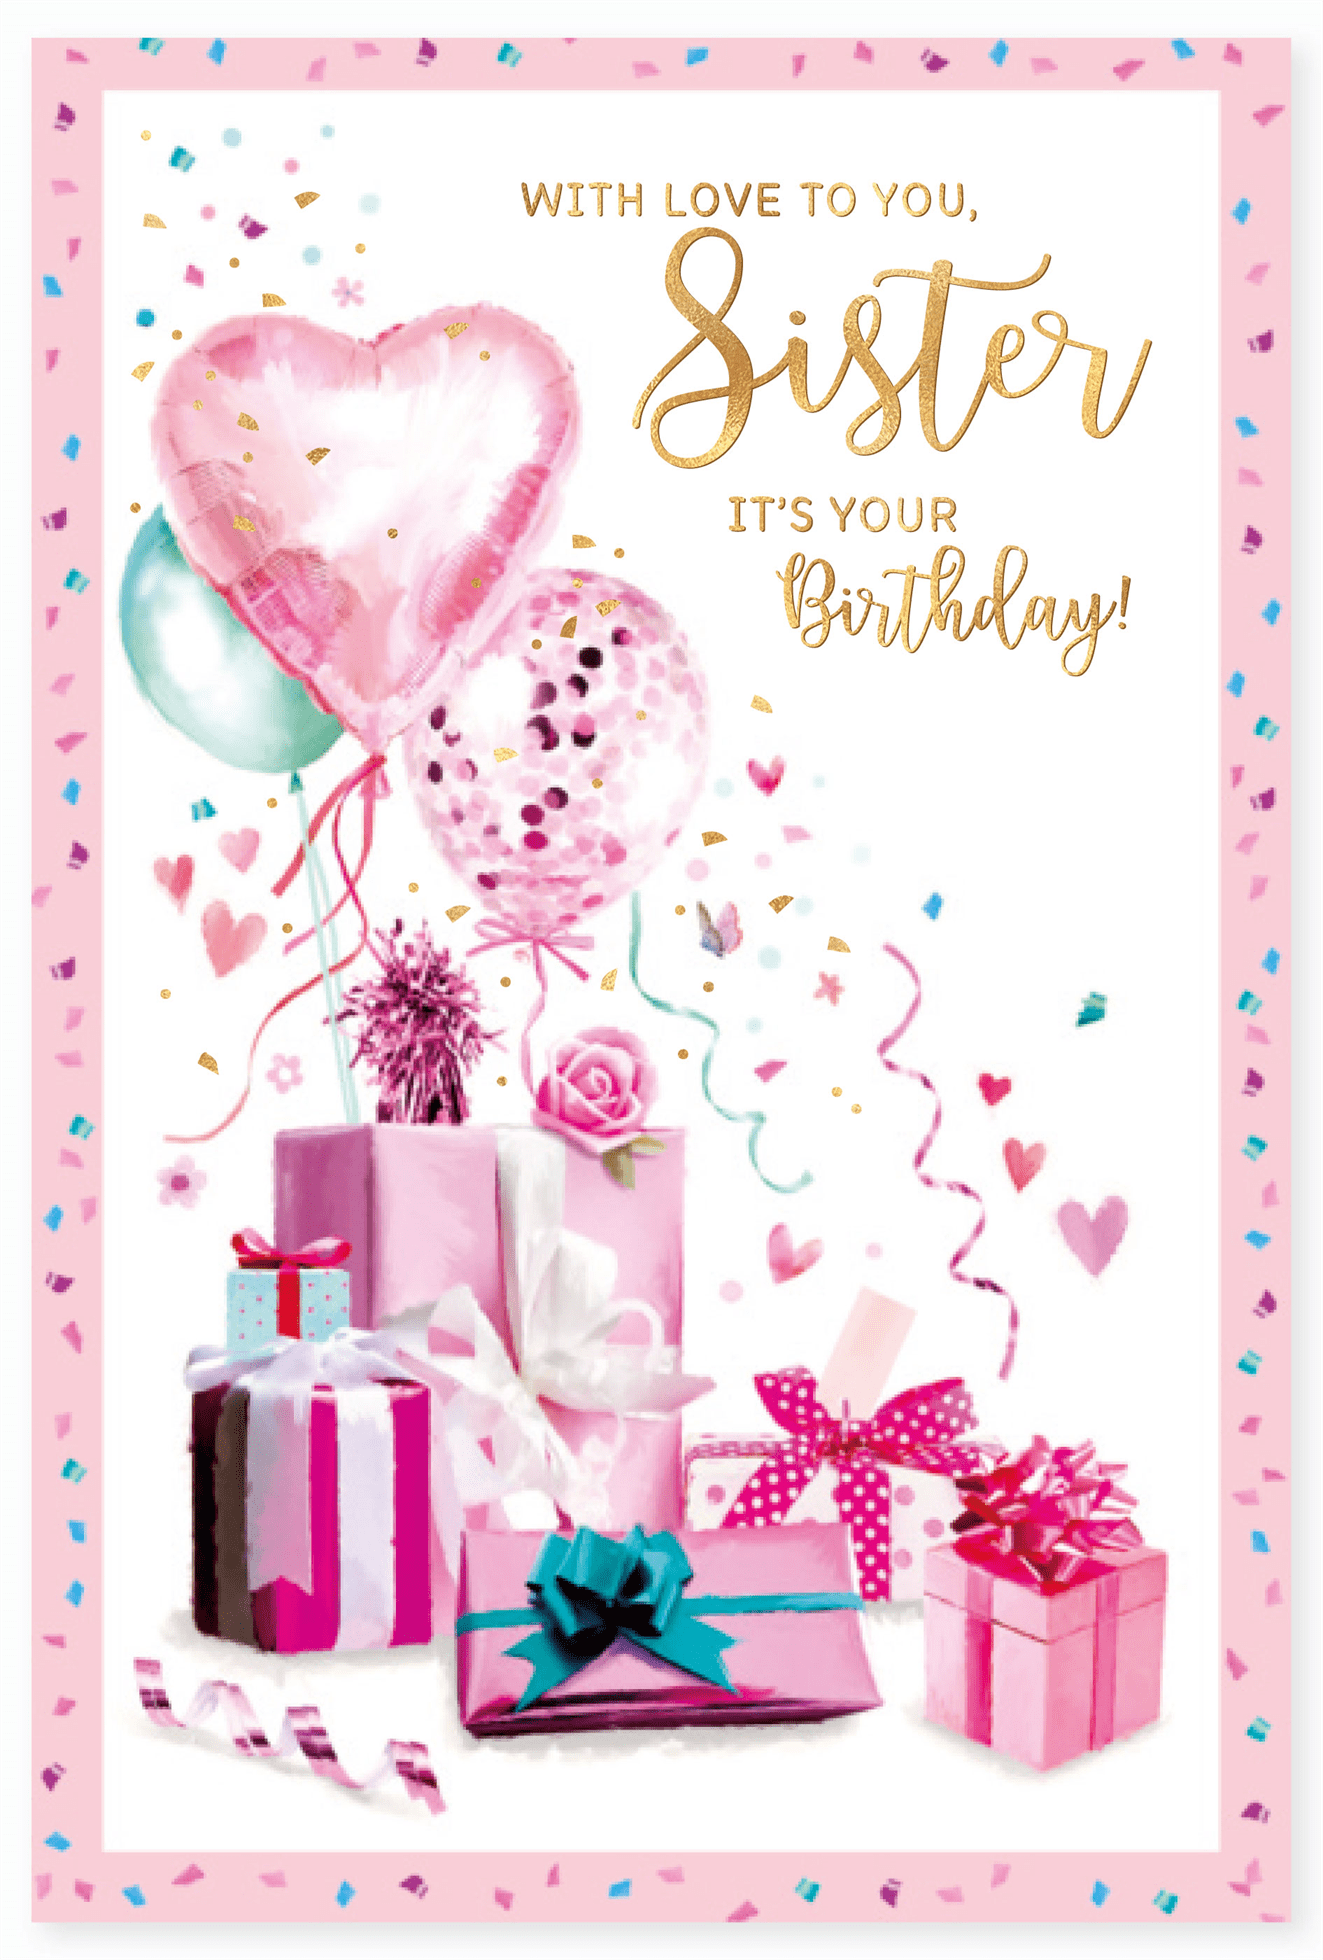 Sister birthday card- balloons and gifts